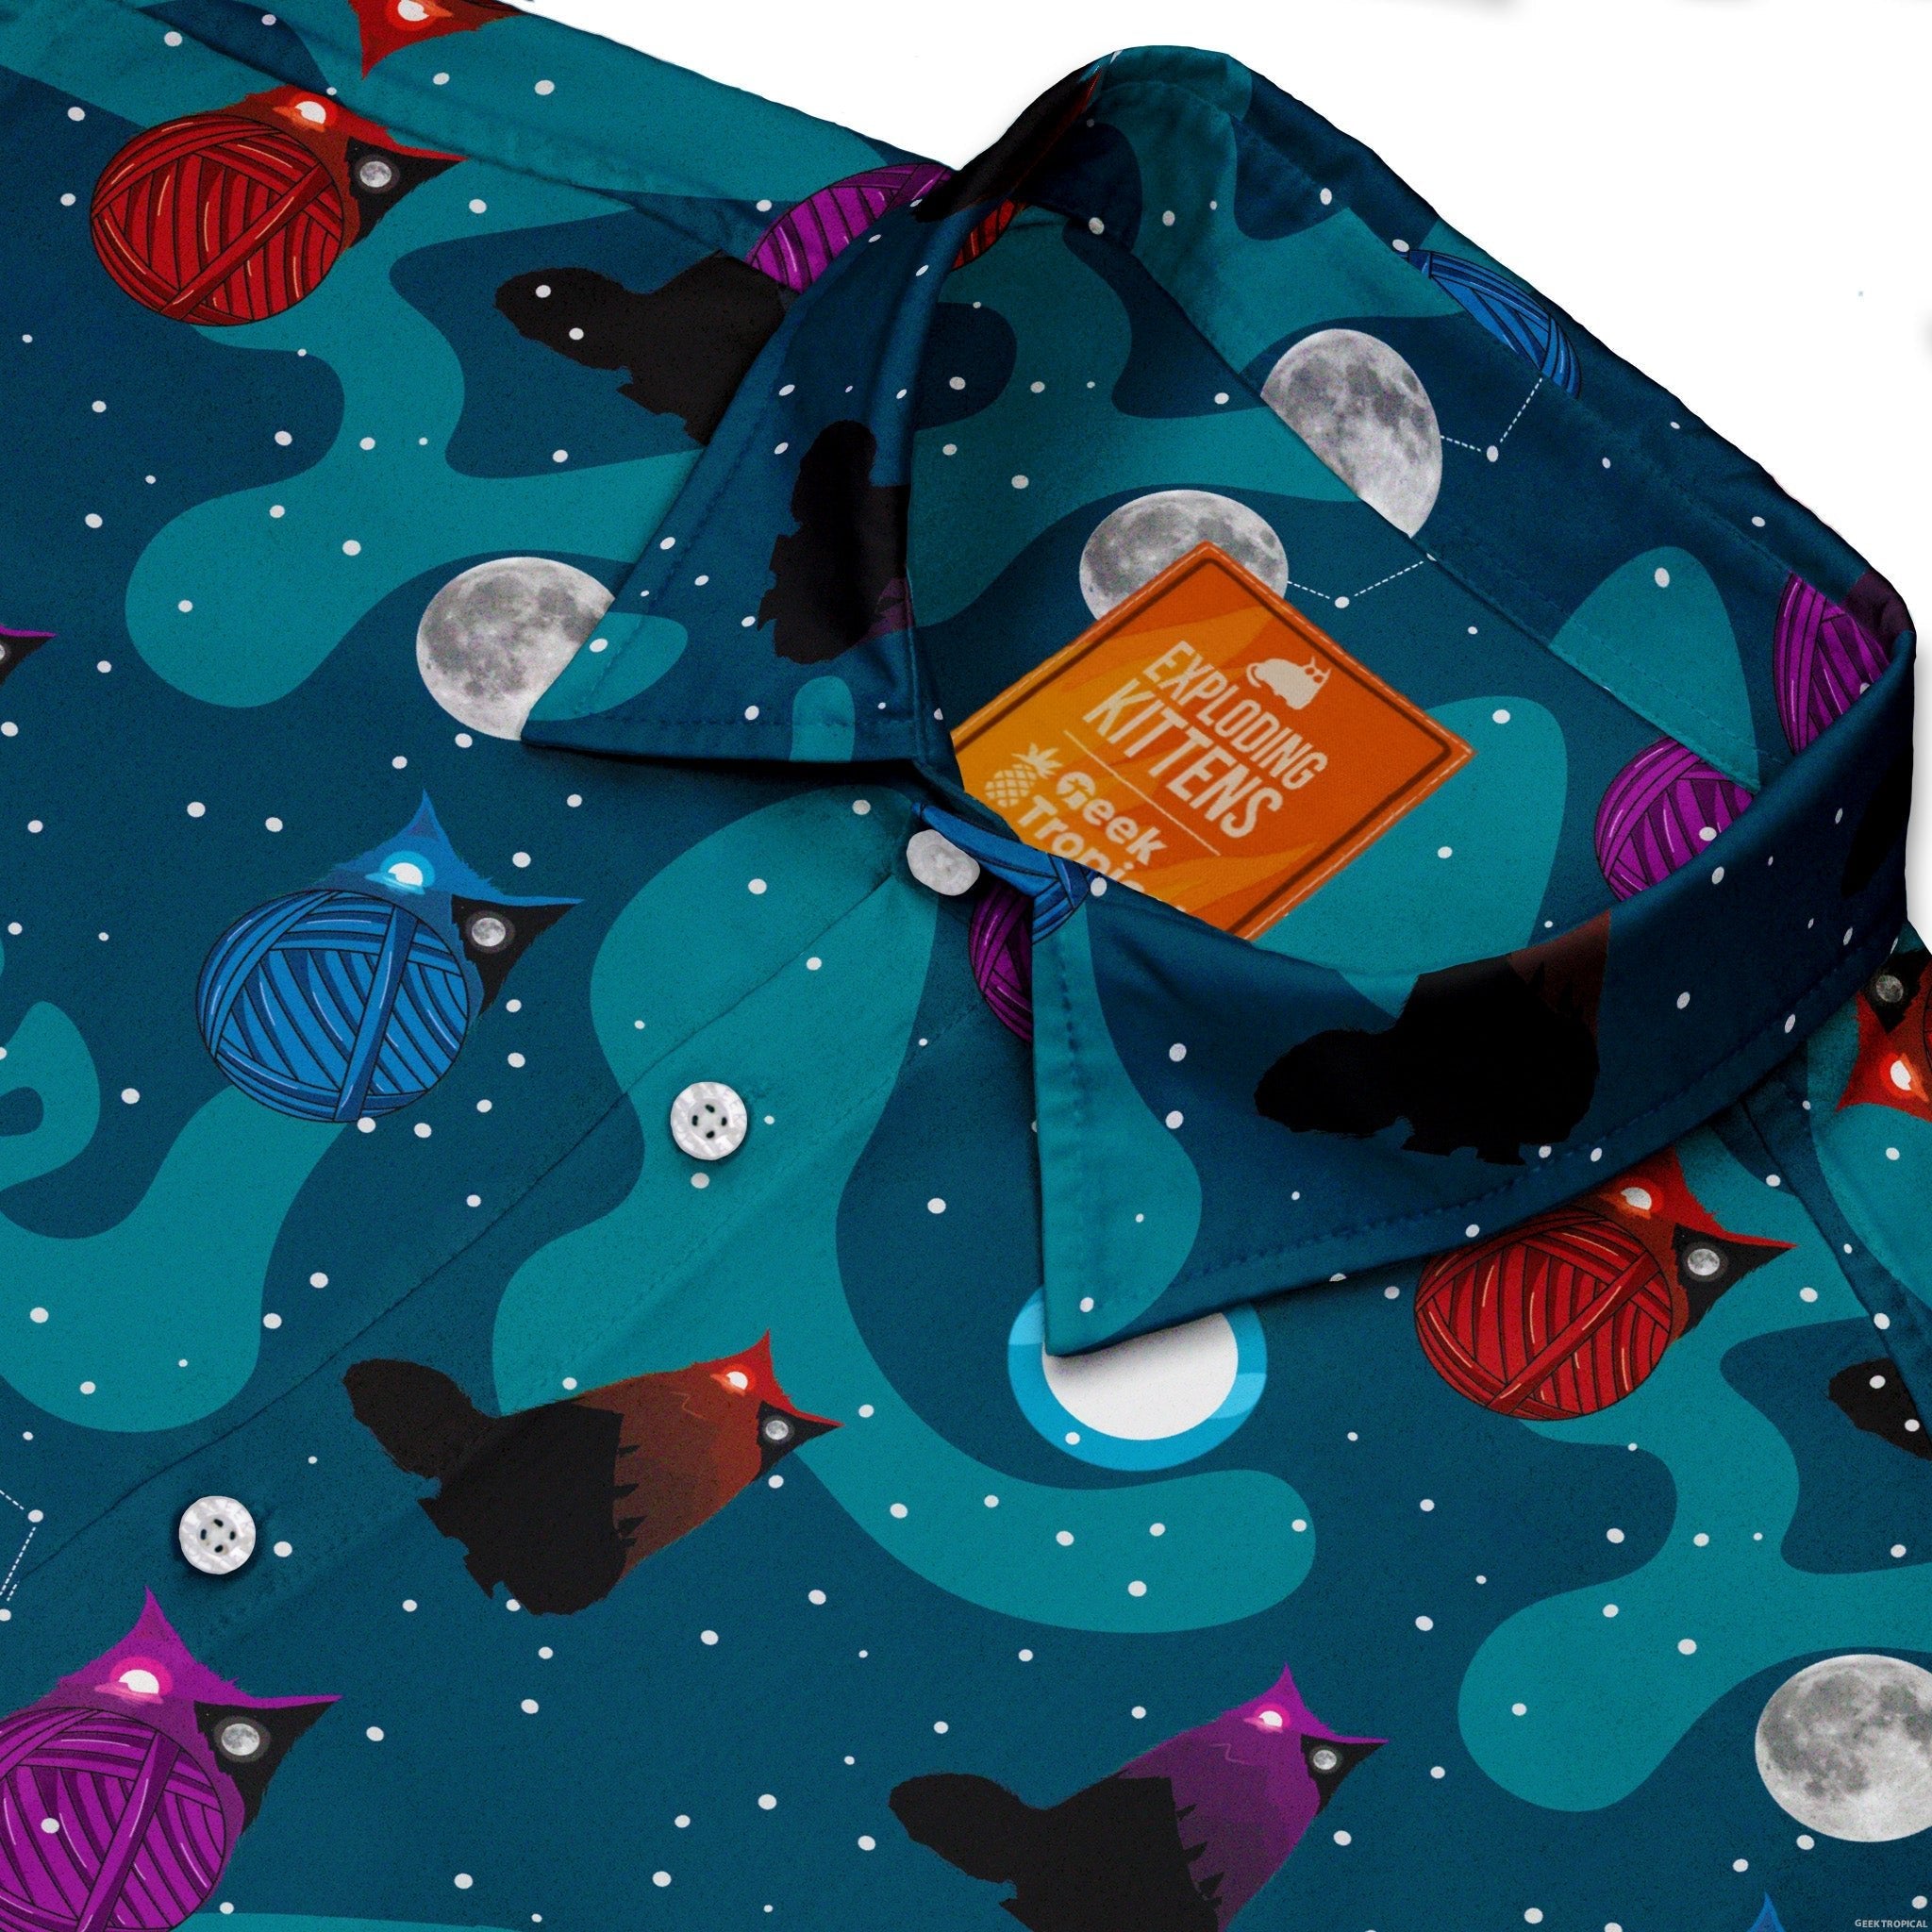 Exploding Kittens Day and Night Sky Cats Button Up Shirt - adult sizing - Animal Patterns - board game print